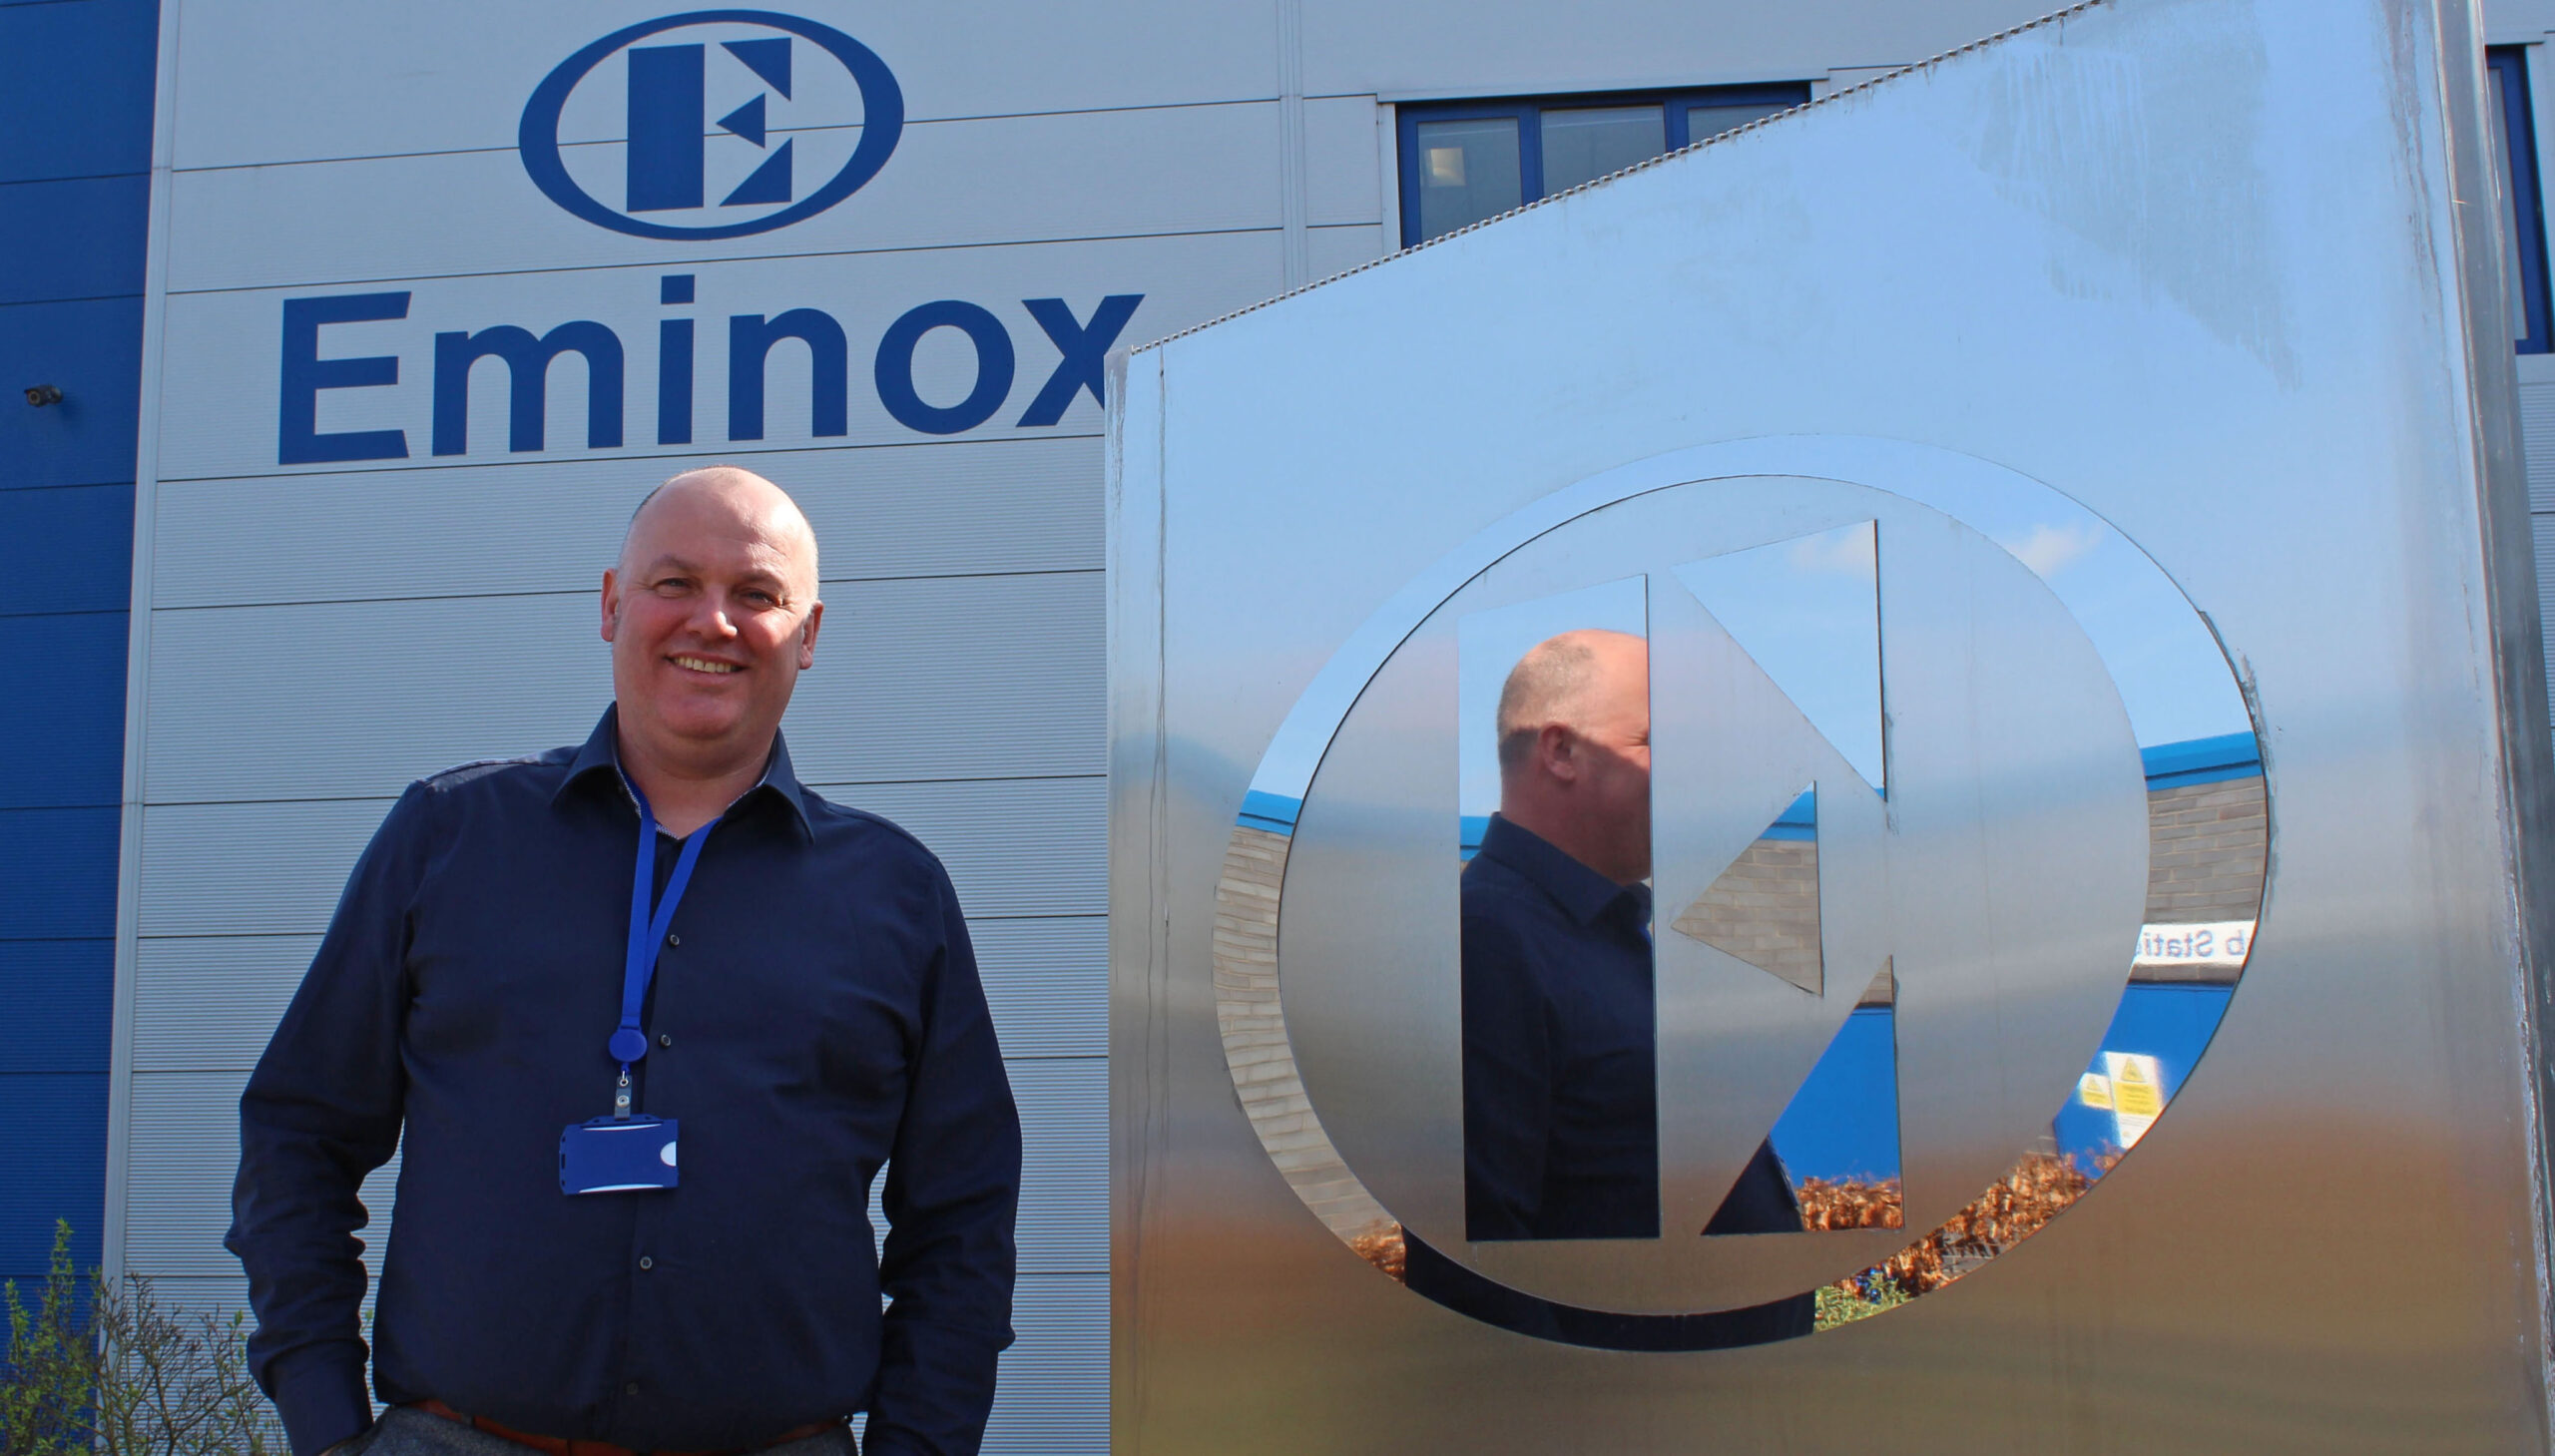 Martin Edwards, Operations Director for Eminox